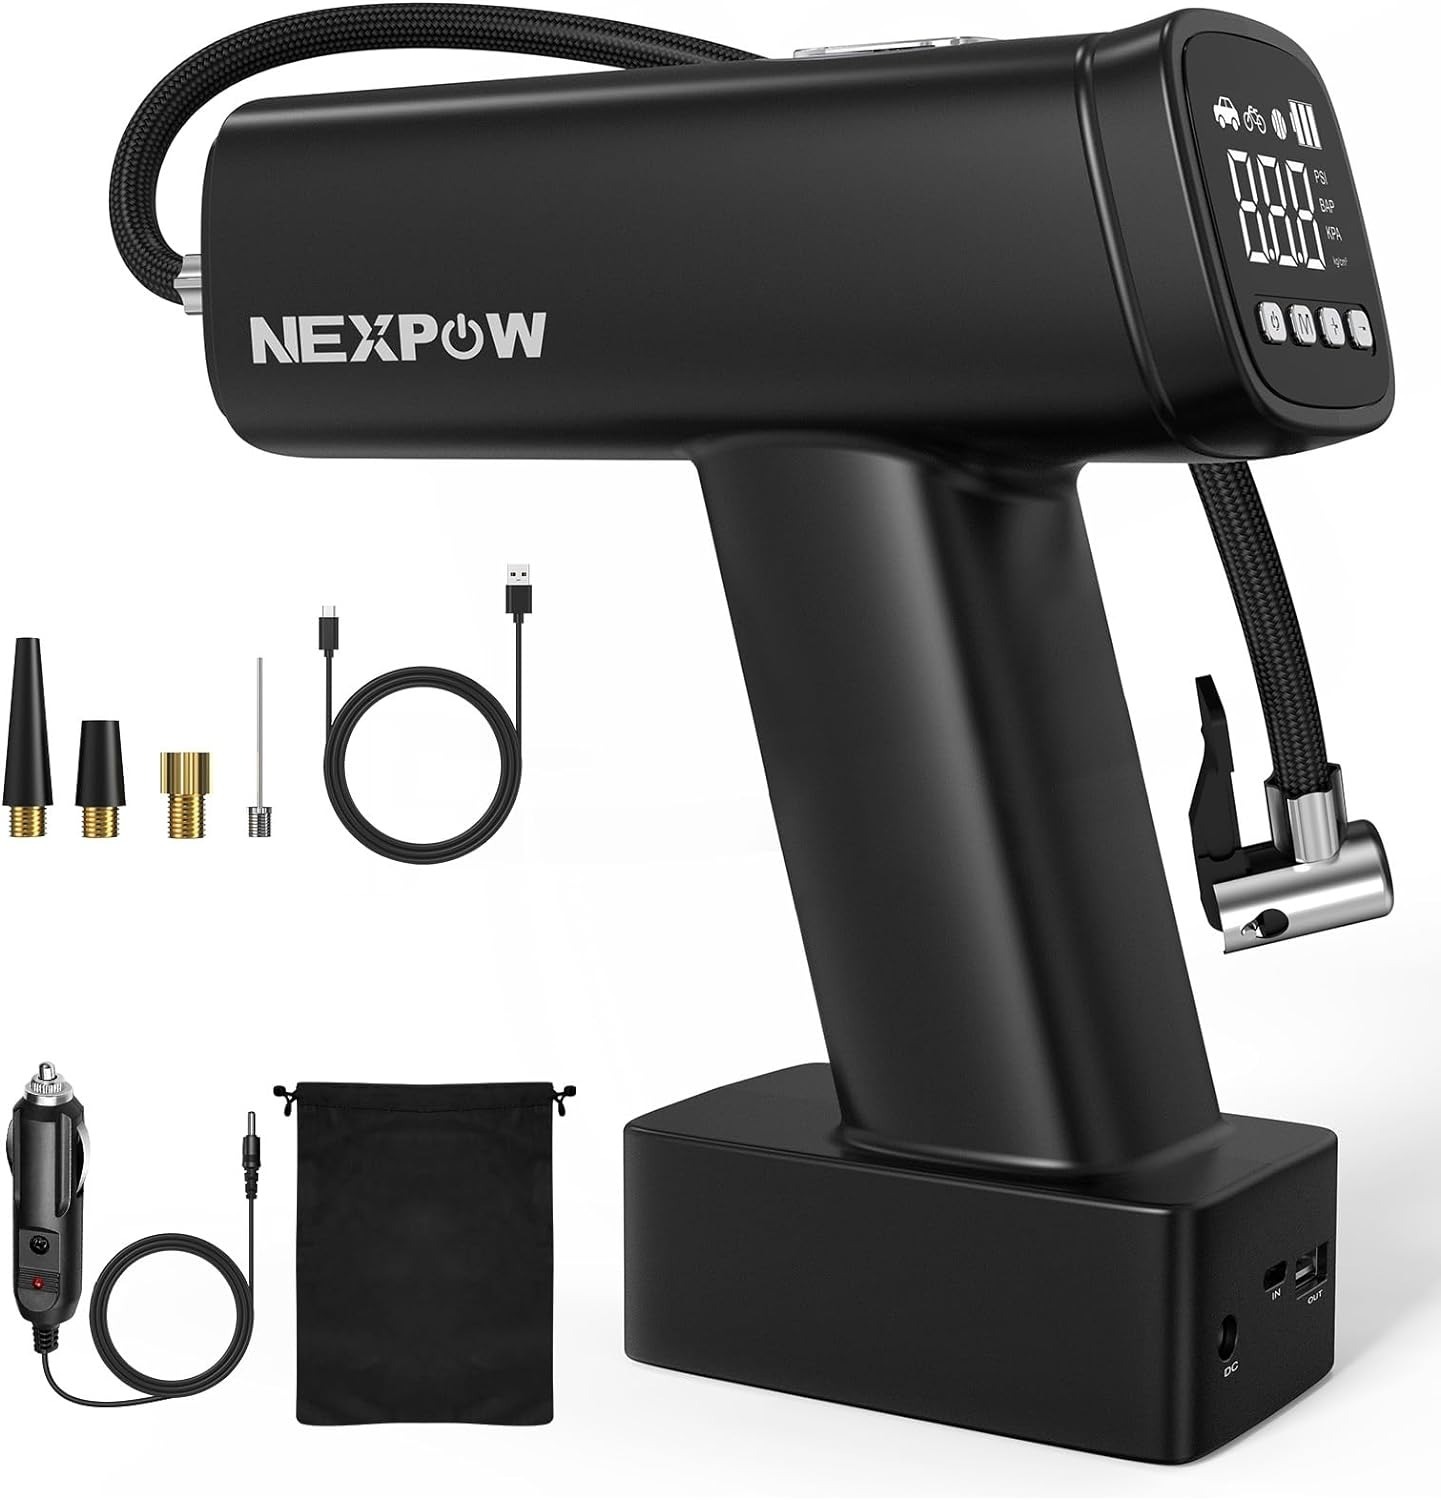 NEXPOW 160PSI 12V Tire Inflator Portable Air Compressor w/ 7500 mAh Battery & Power Bank $16 + Free Shipping w/ Prime or $35+ orders